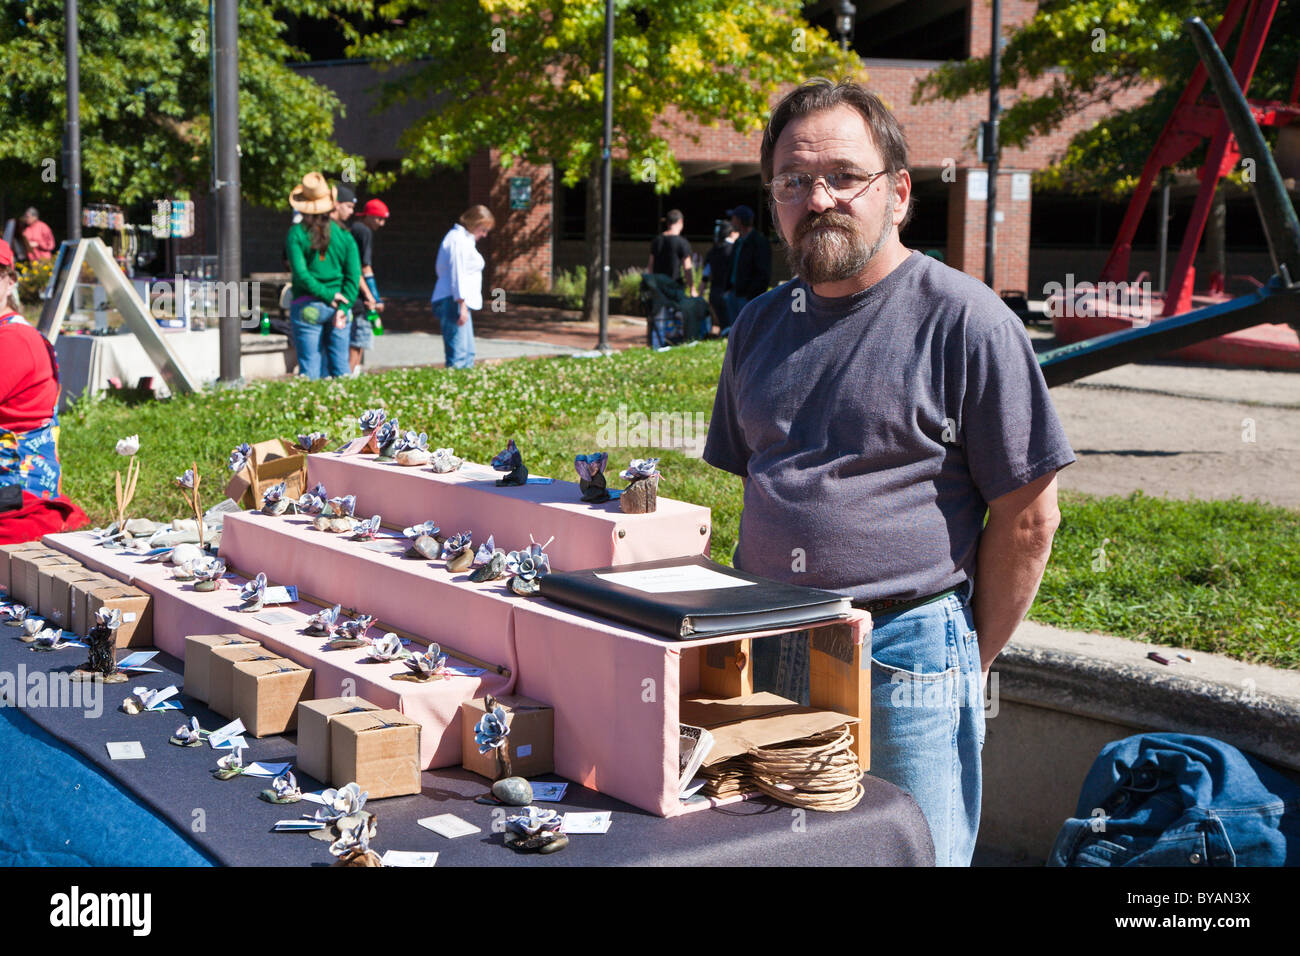 Local craftsman near the cruise terminal selling hand crafted souvenirs made from shells in Portland, Maine Stock Photo